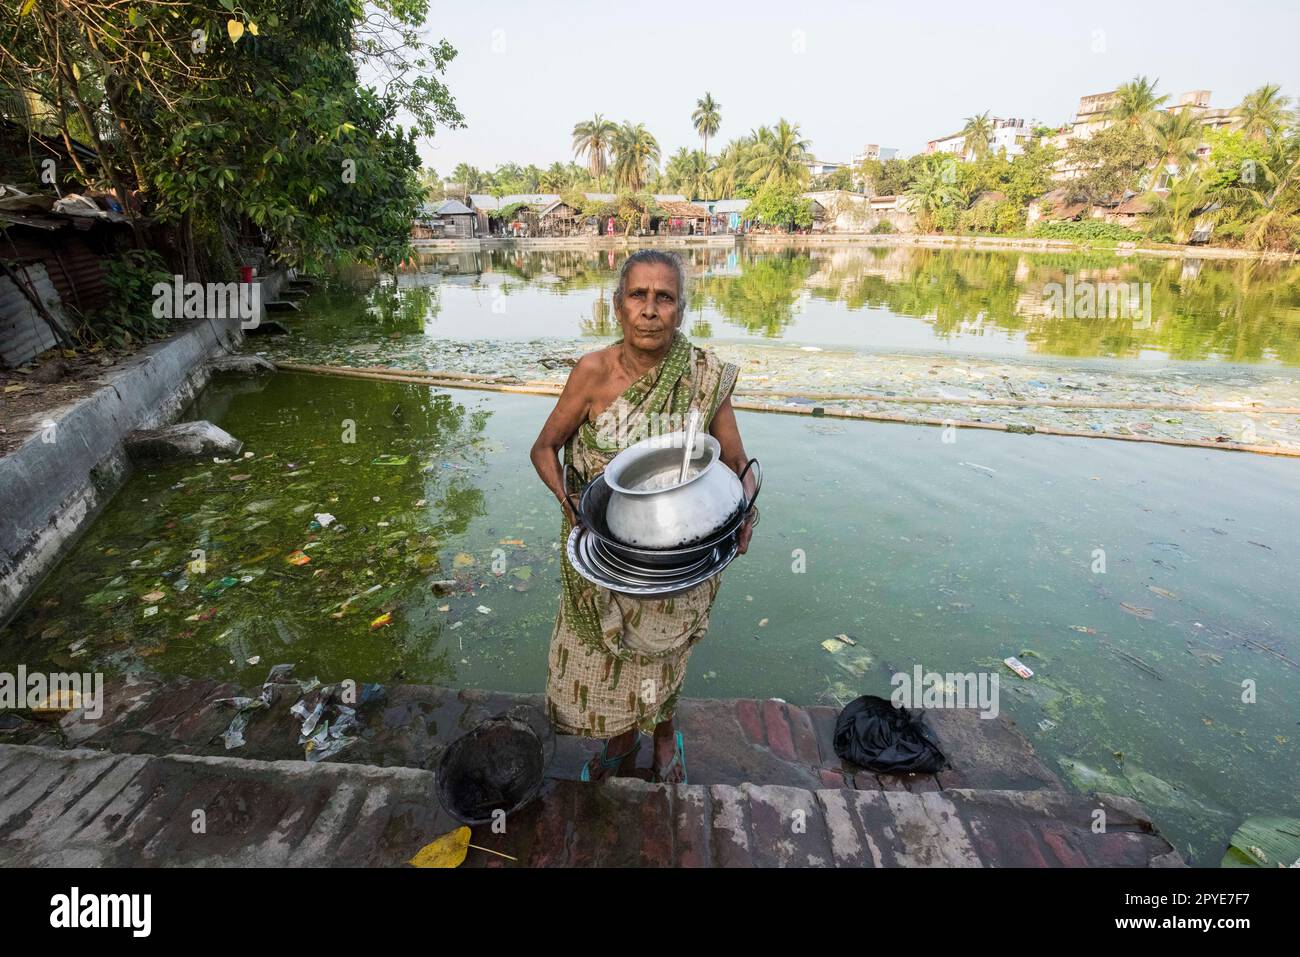 Bangladesh, Khulna, Sonadanga.A woman cleans her pots in the polluted pond water near her home. March 19, 2017. Editorial use only. Stock Photo